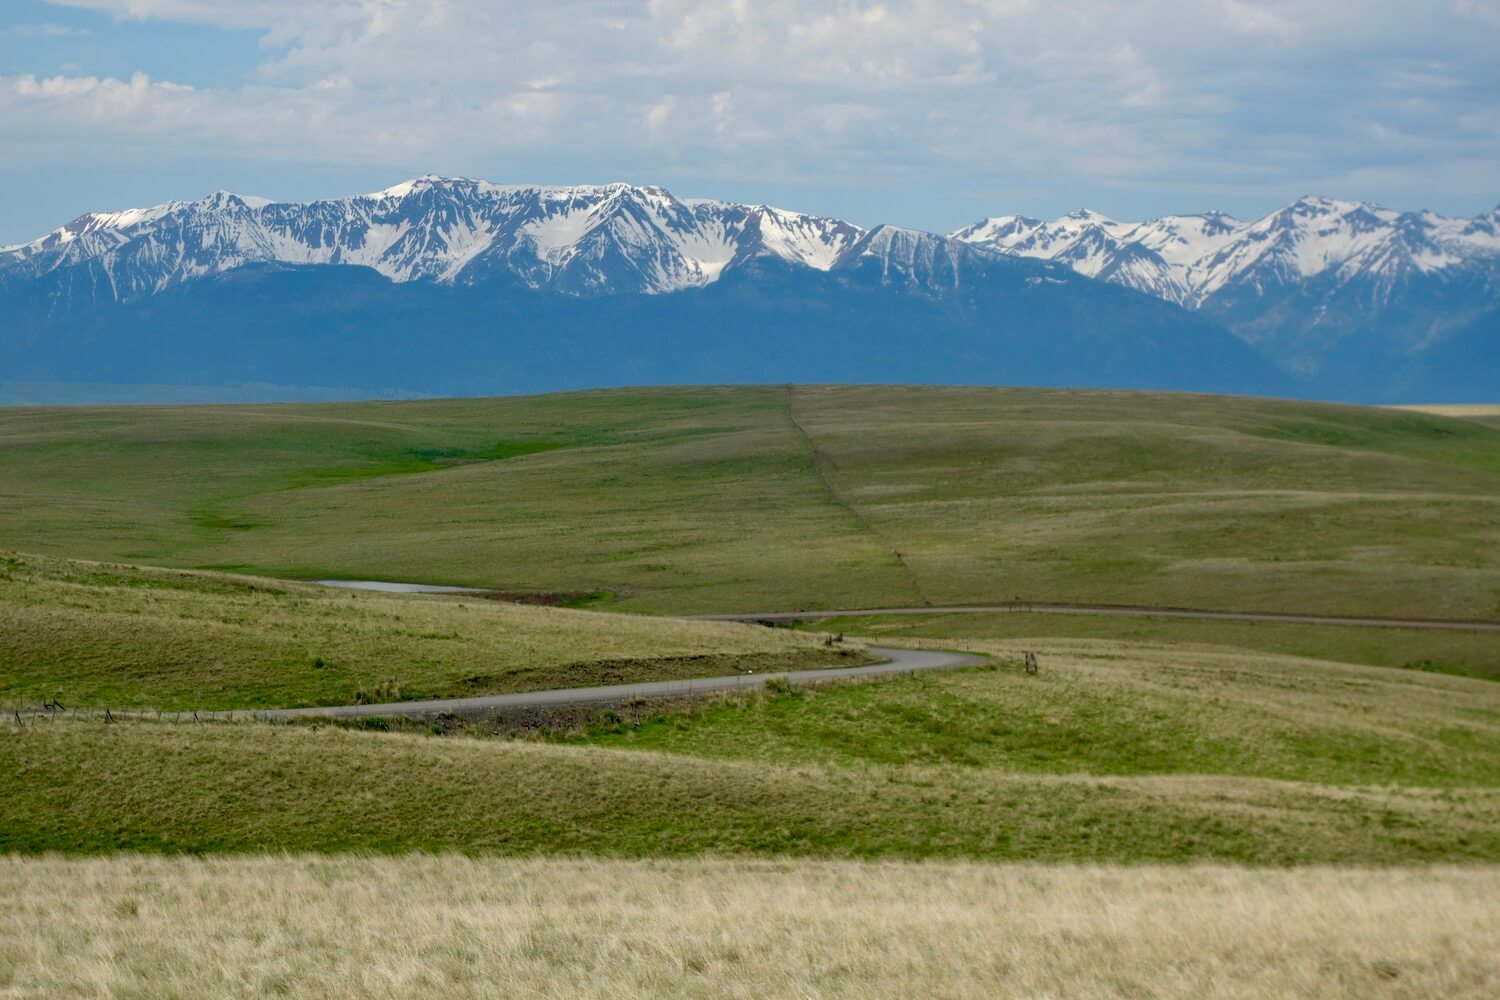 This photo taken on an Oregon road trip shows a winding gravel road leading toward the majestic Wallowa Mountains that are still snow capped in the background. 